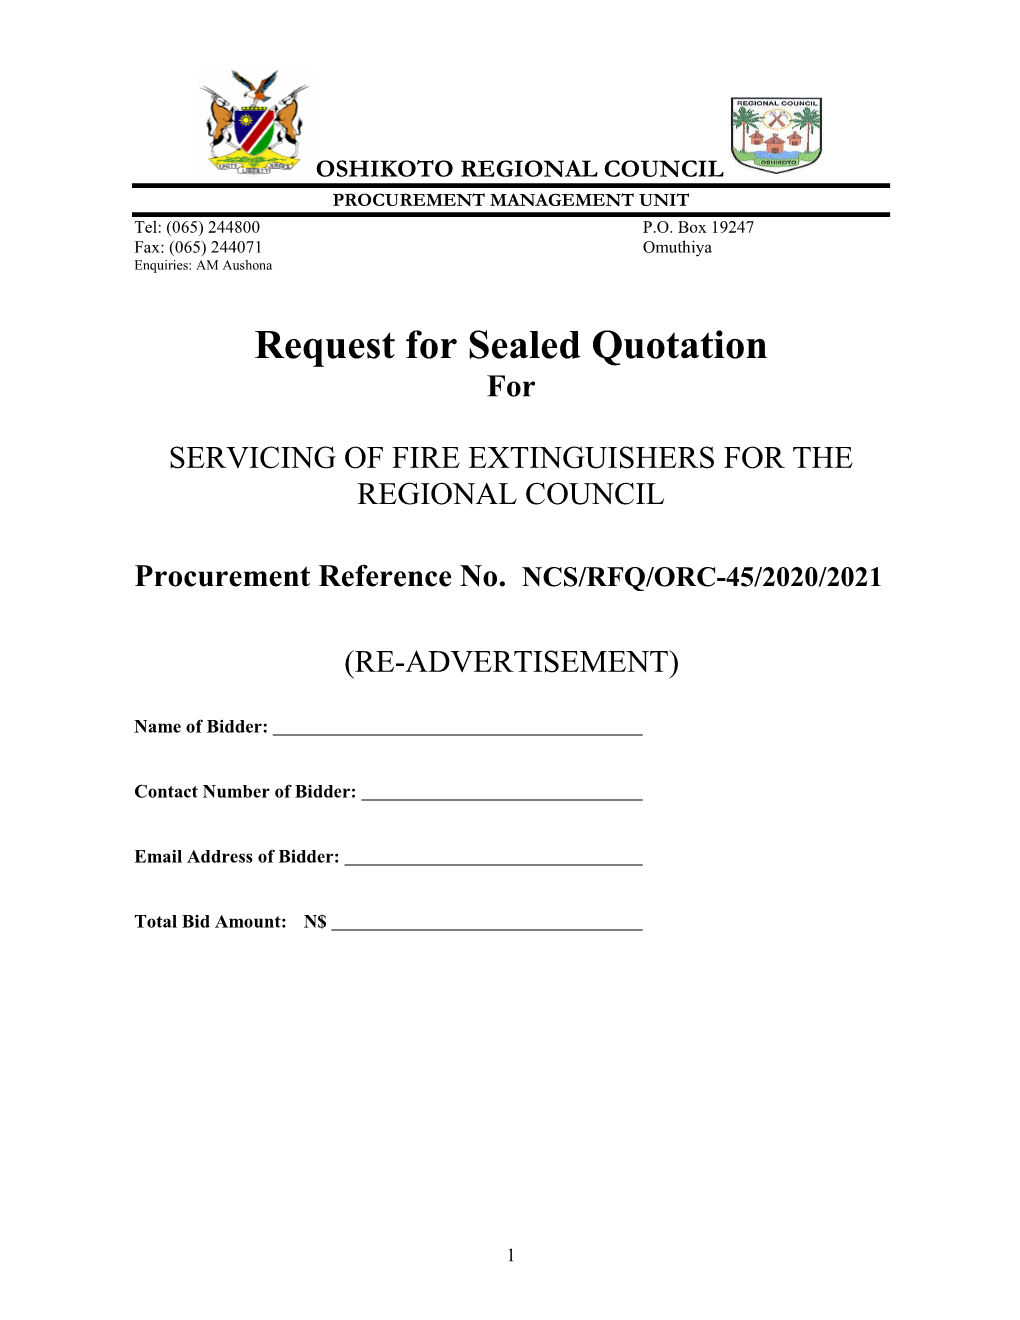 Request for Sealed Quotation For